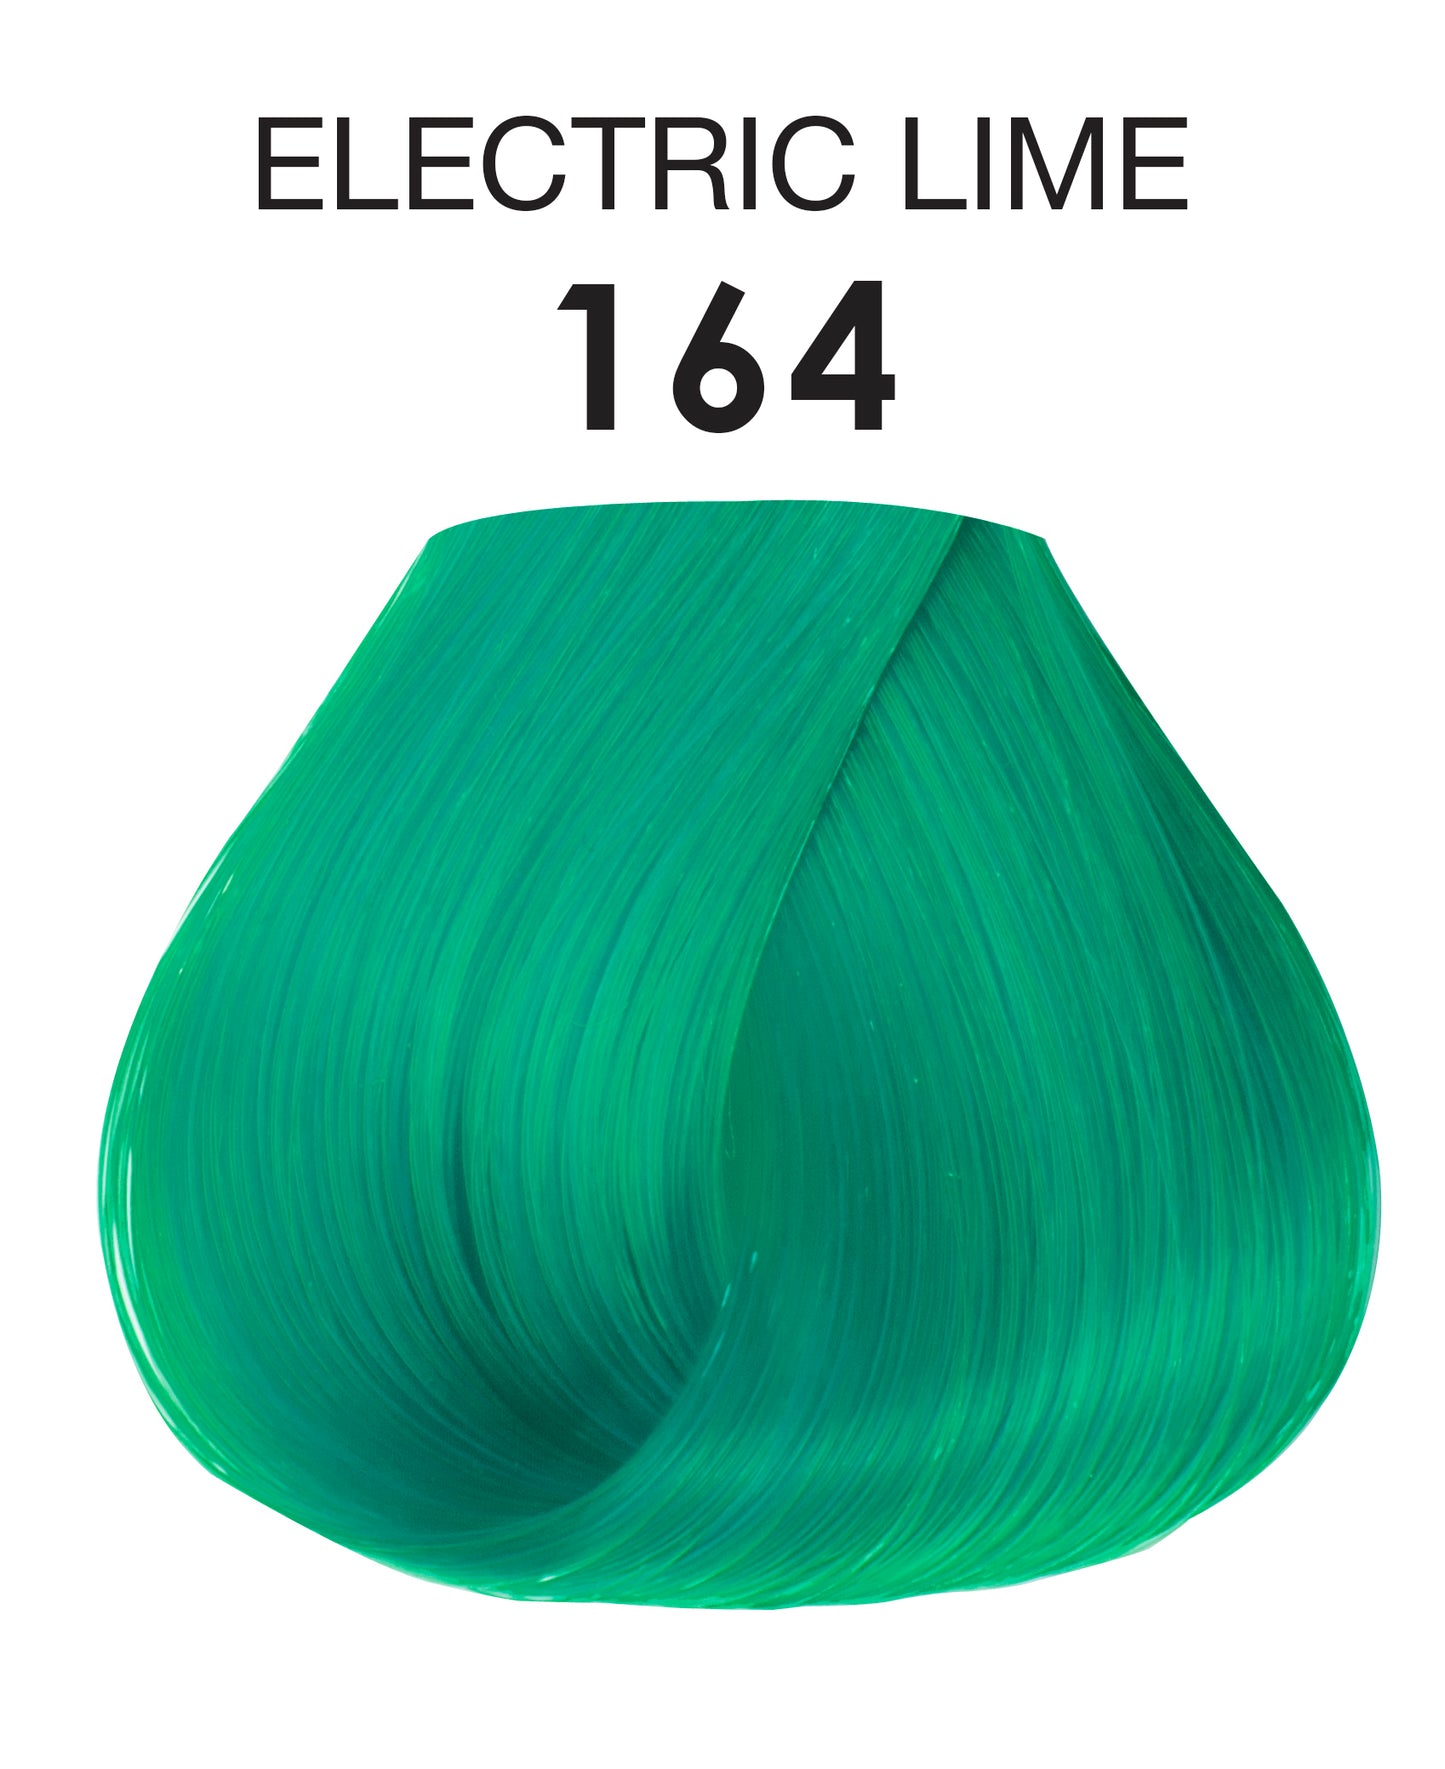 Adore #164 Electric Lime